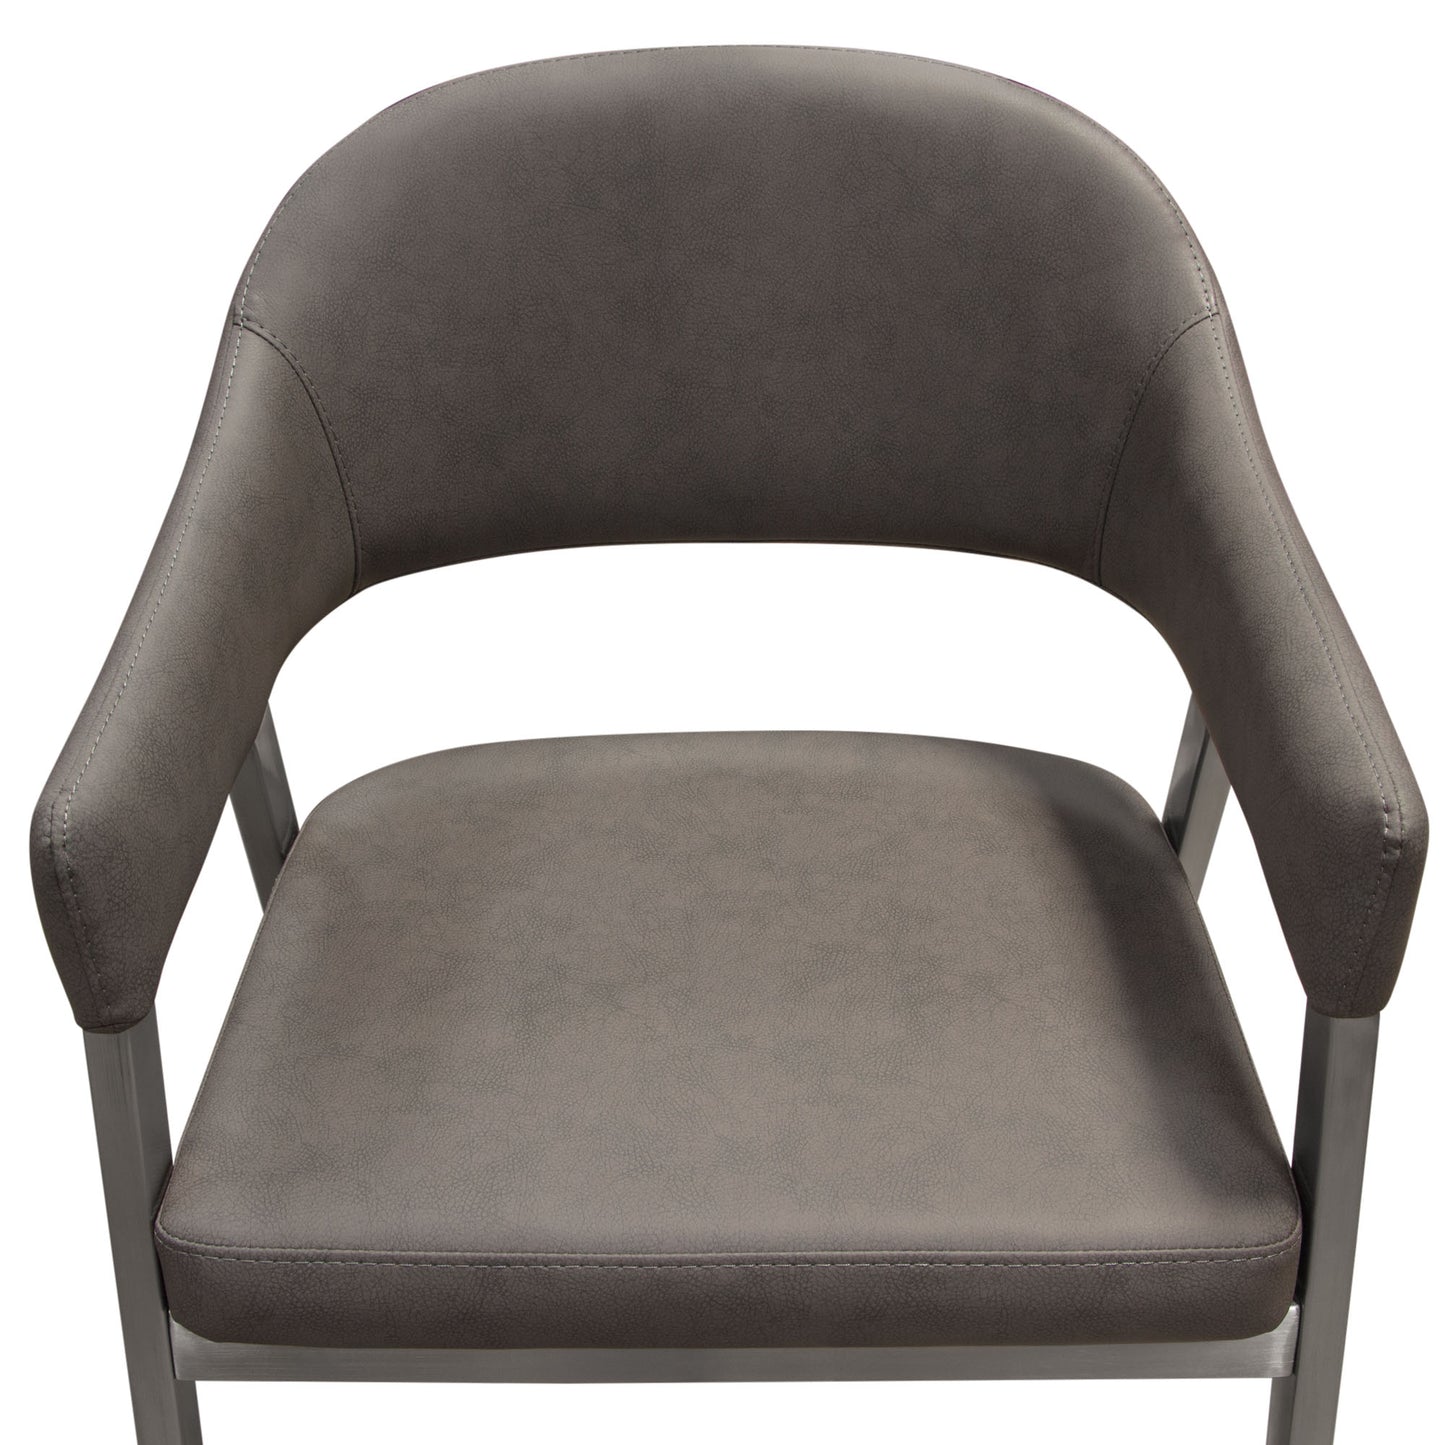 Adele Set of Two Dining/Accent Chairs in Grey Leatherette w/ Brushed Stainless Steel Leg